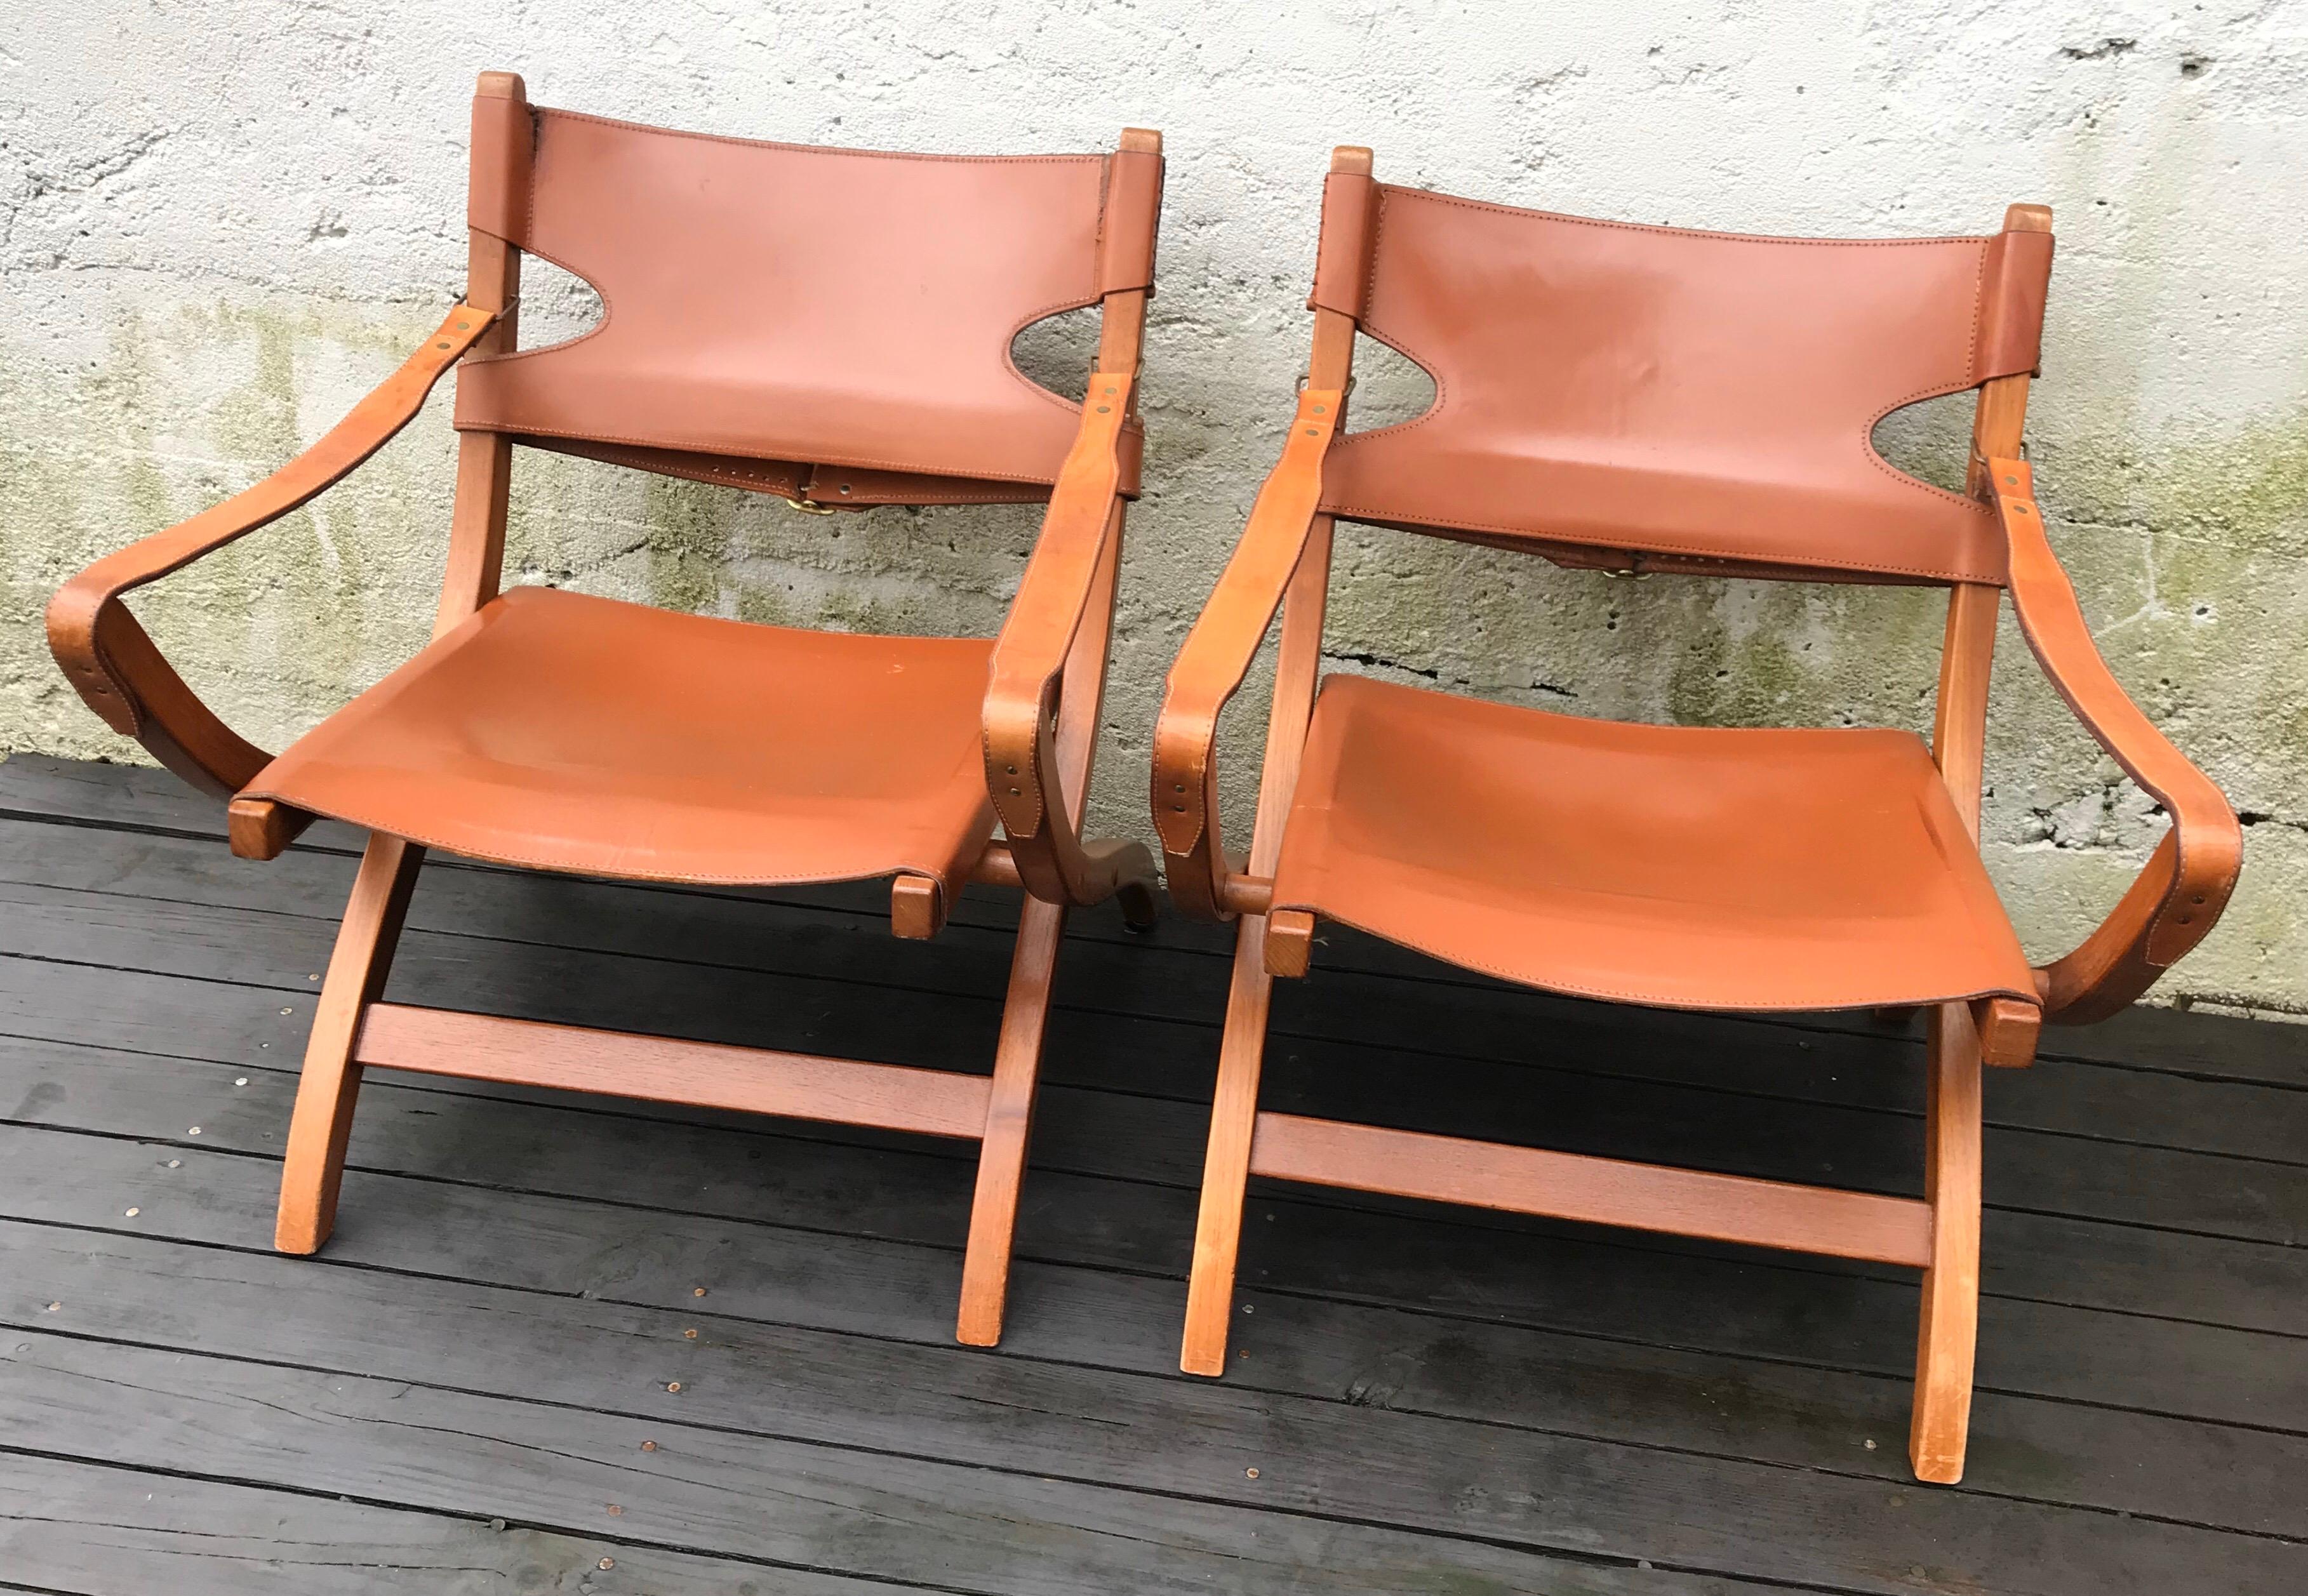 Beautiful pair of Poul Hundevad campaign X-leather folding lounge chairs with X-shaped legs, inspired by ancient Egyptian thrones and chairs. The frames are solid oak, seats and back rests are made of cognac colored saddle leather. Natural leather